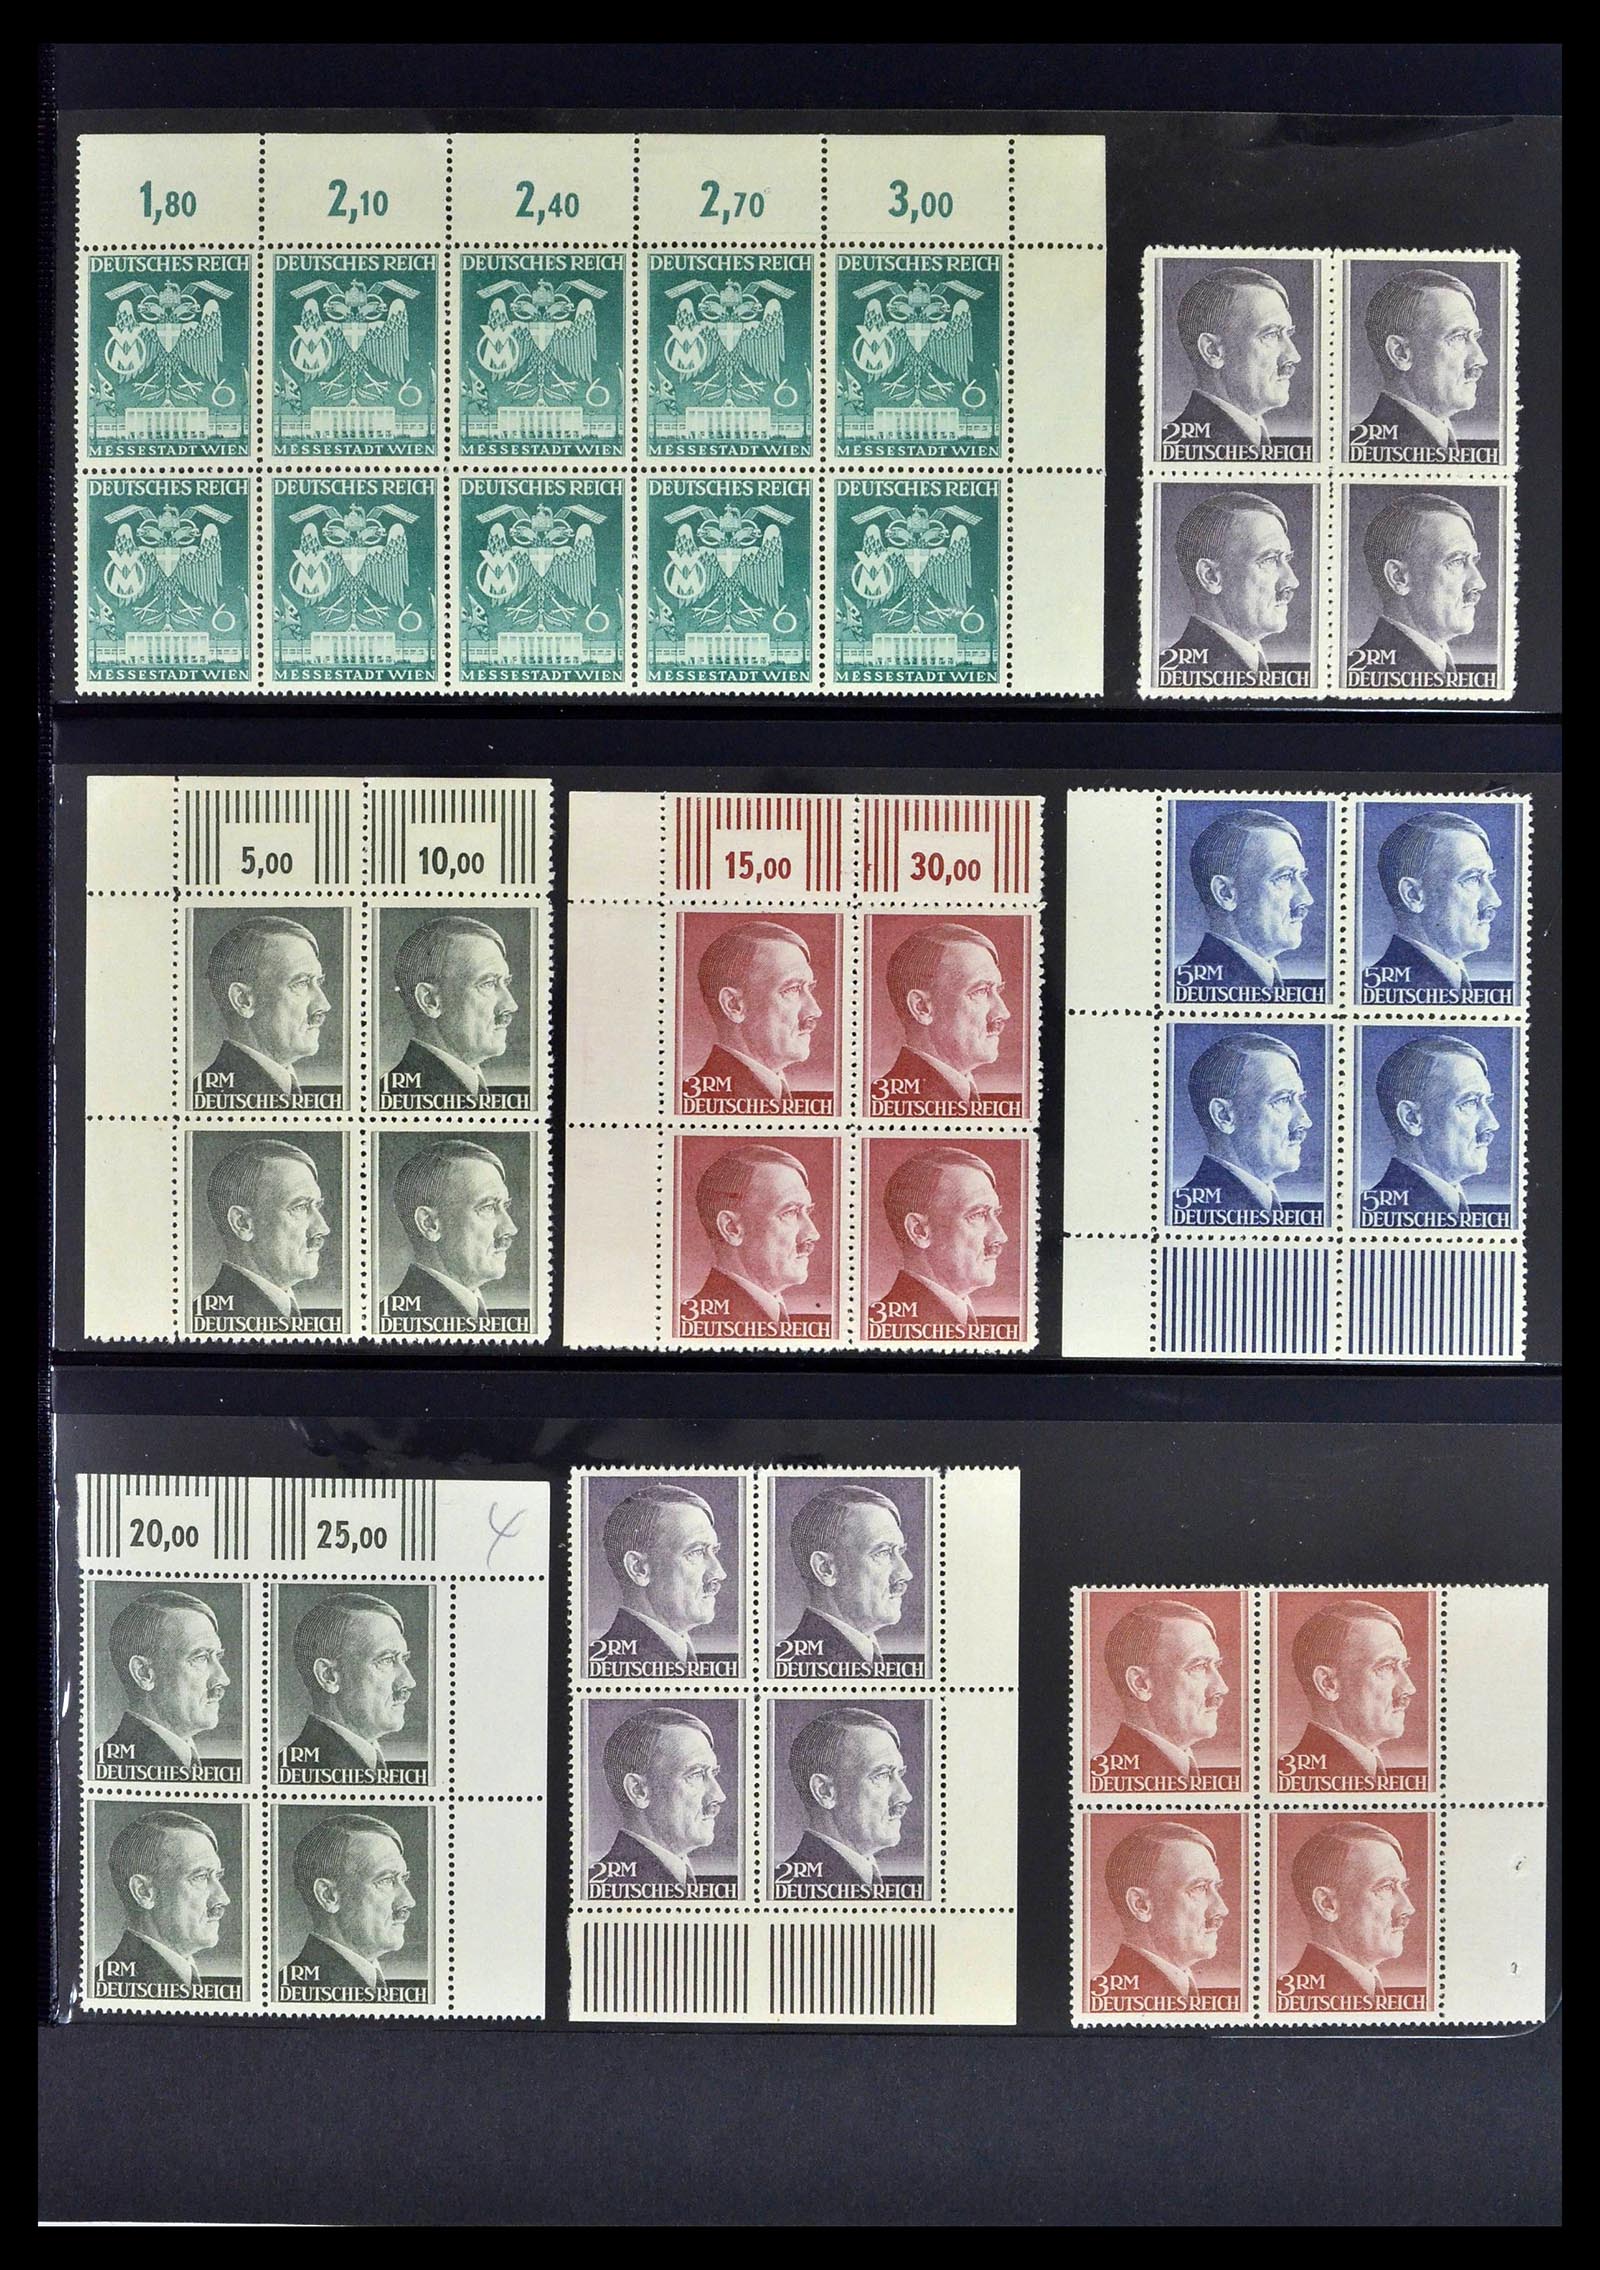 39255 0023 - Stamp collection 39255 German Reich MNH blocks of 4.